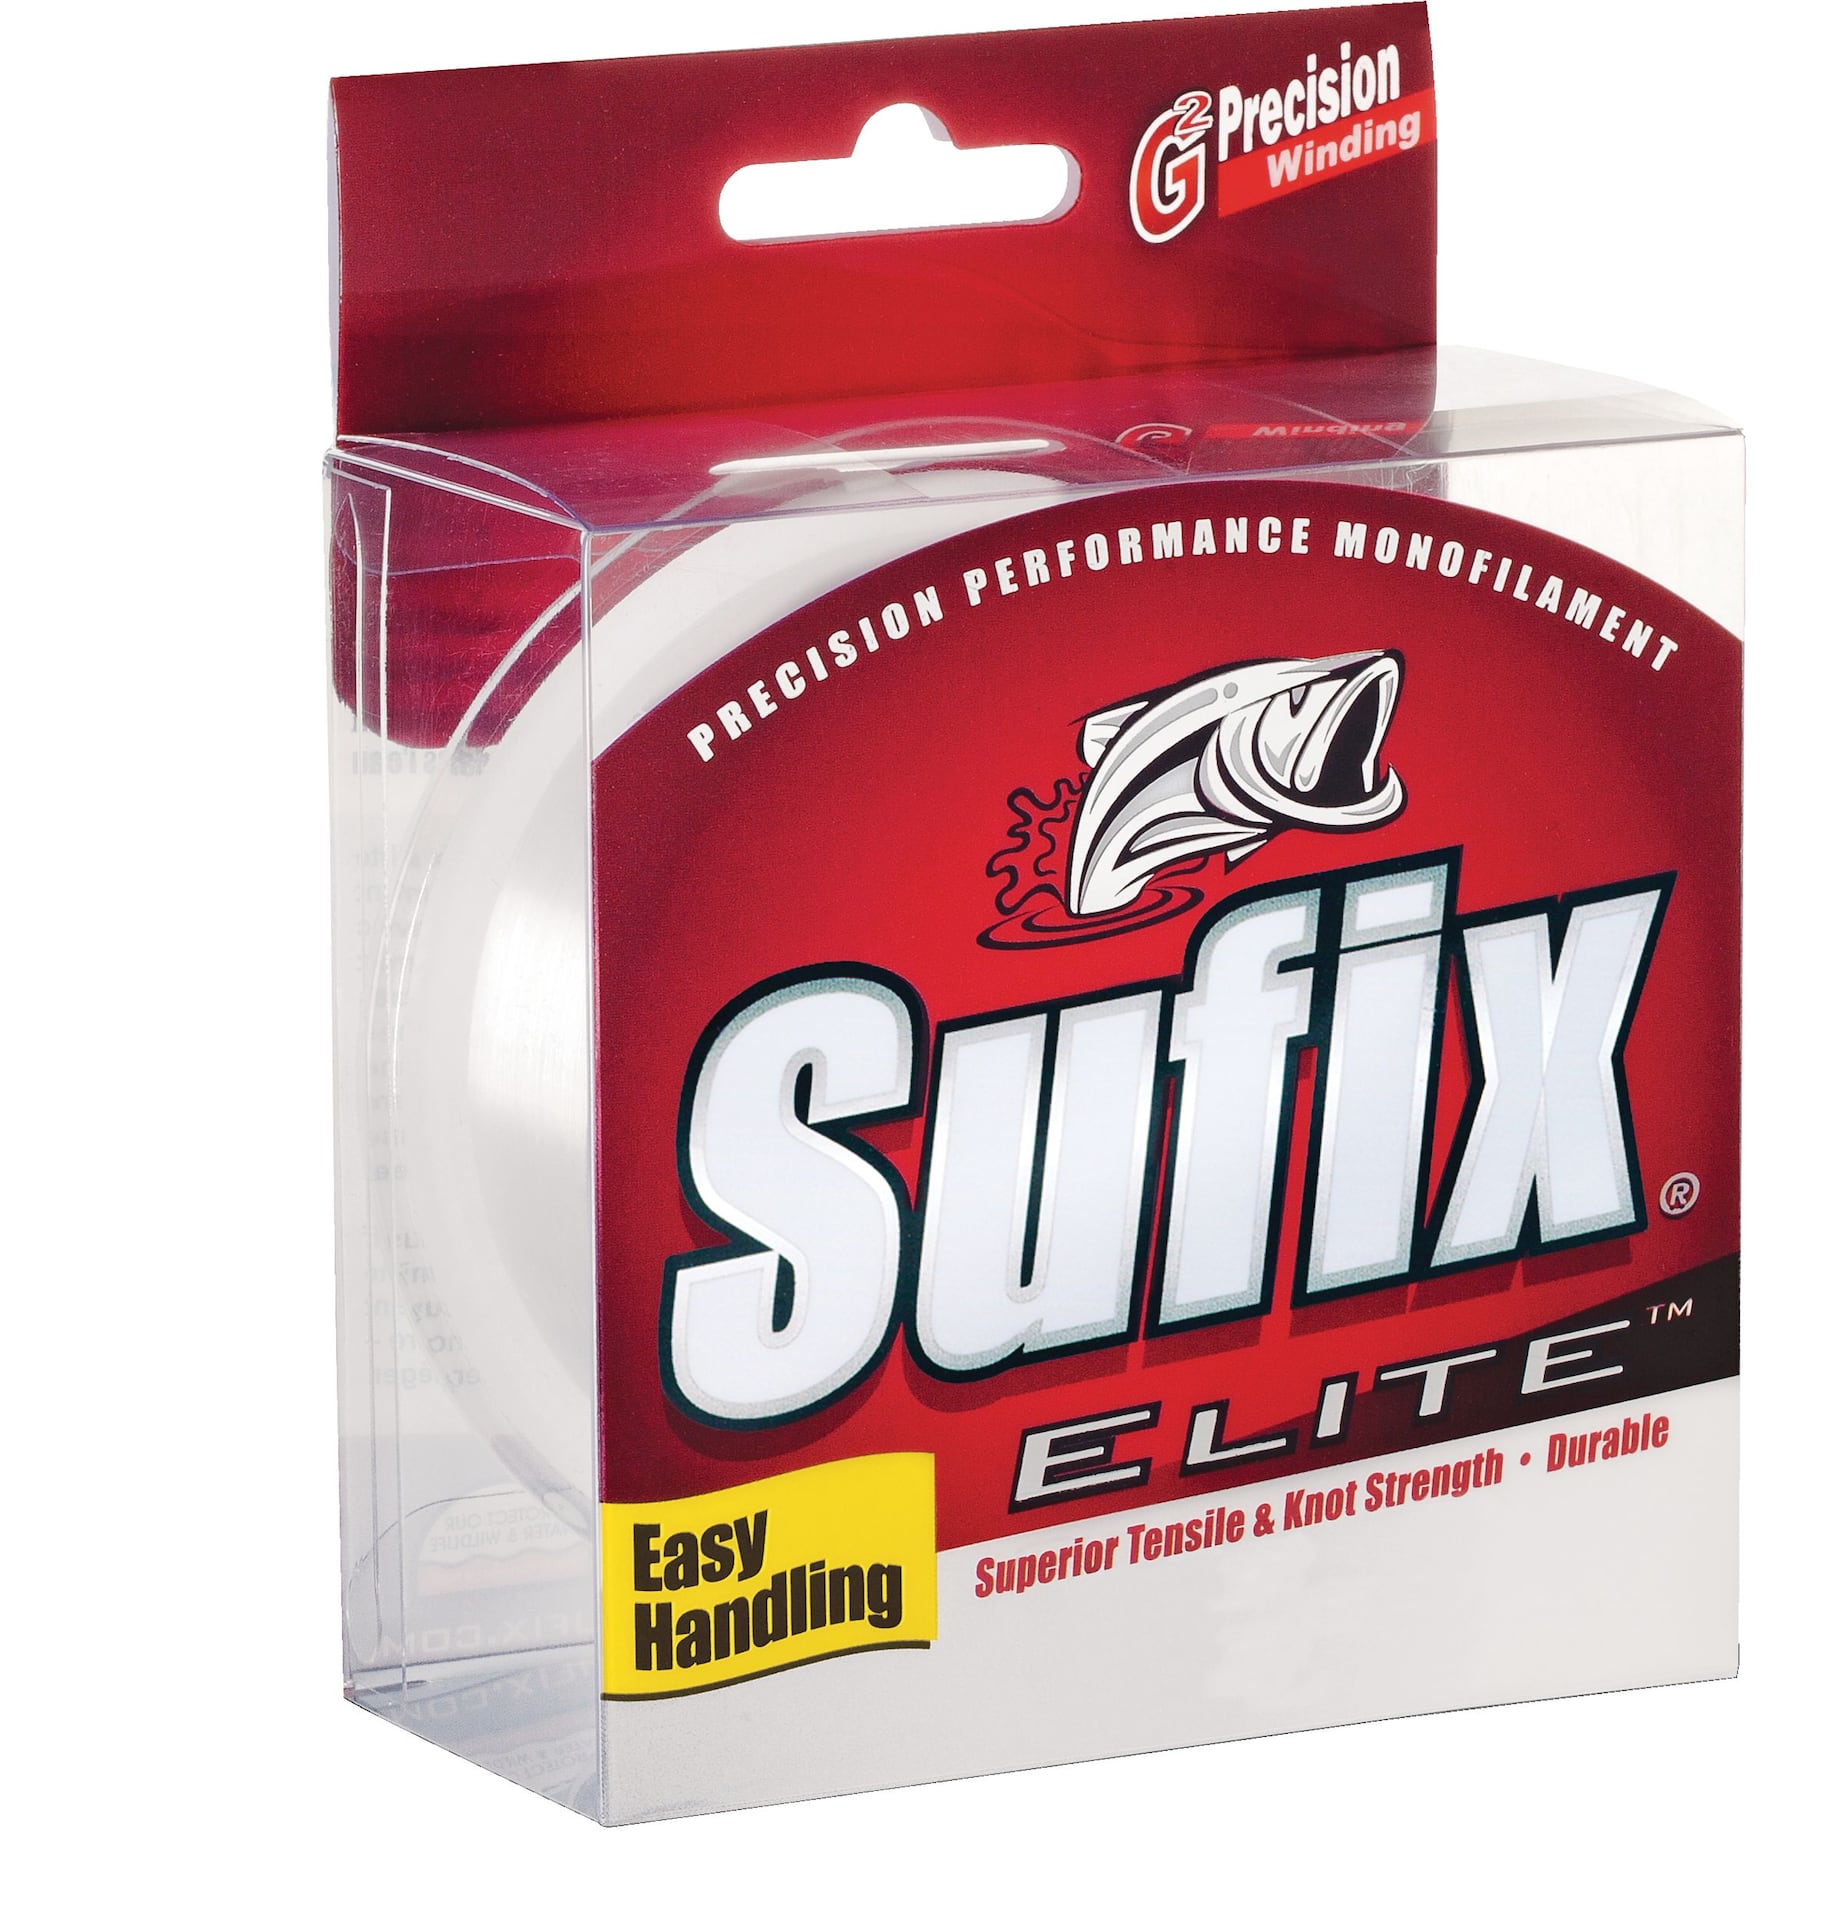 Seige Suffix 10lb Clear 330 Yards Fishing Line for sale online